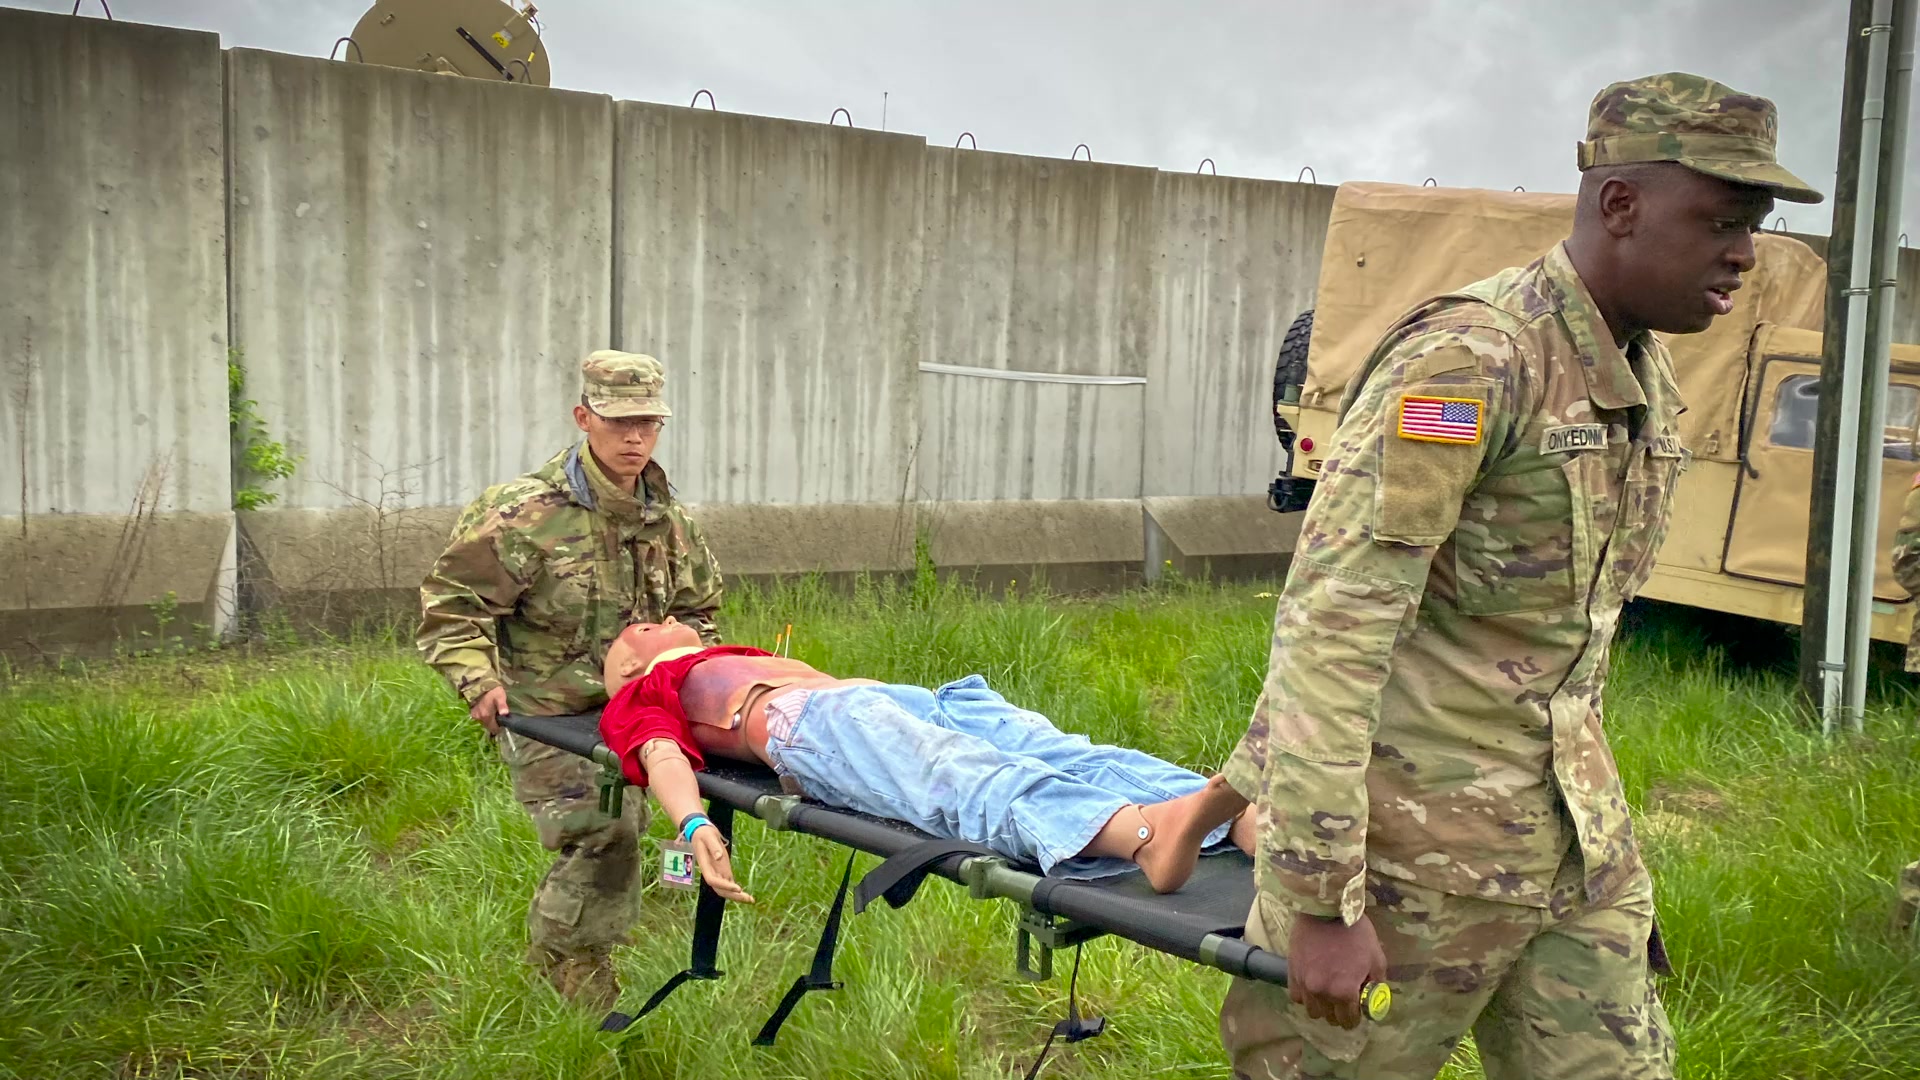 Soldiers from the 441st Ground Ambulance Company speak about their mission at Guardian Response 2021, Camp Atterbury, Indiana, April 2021.